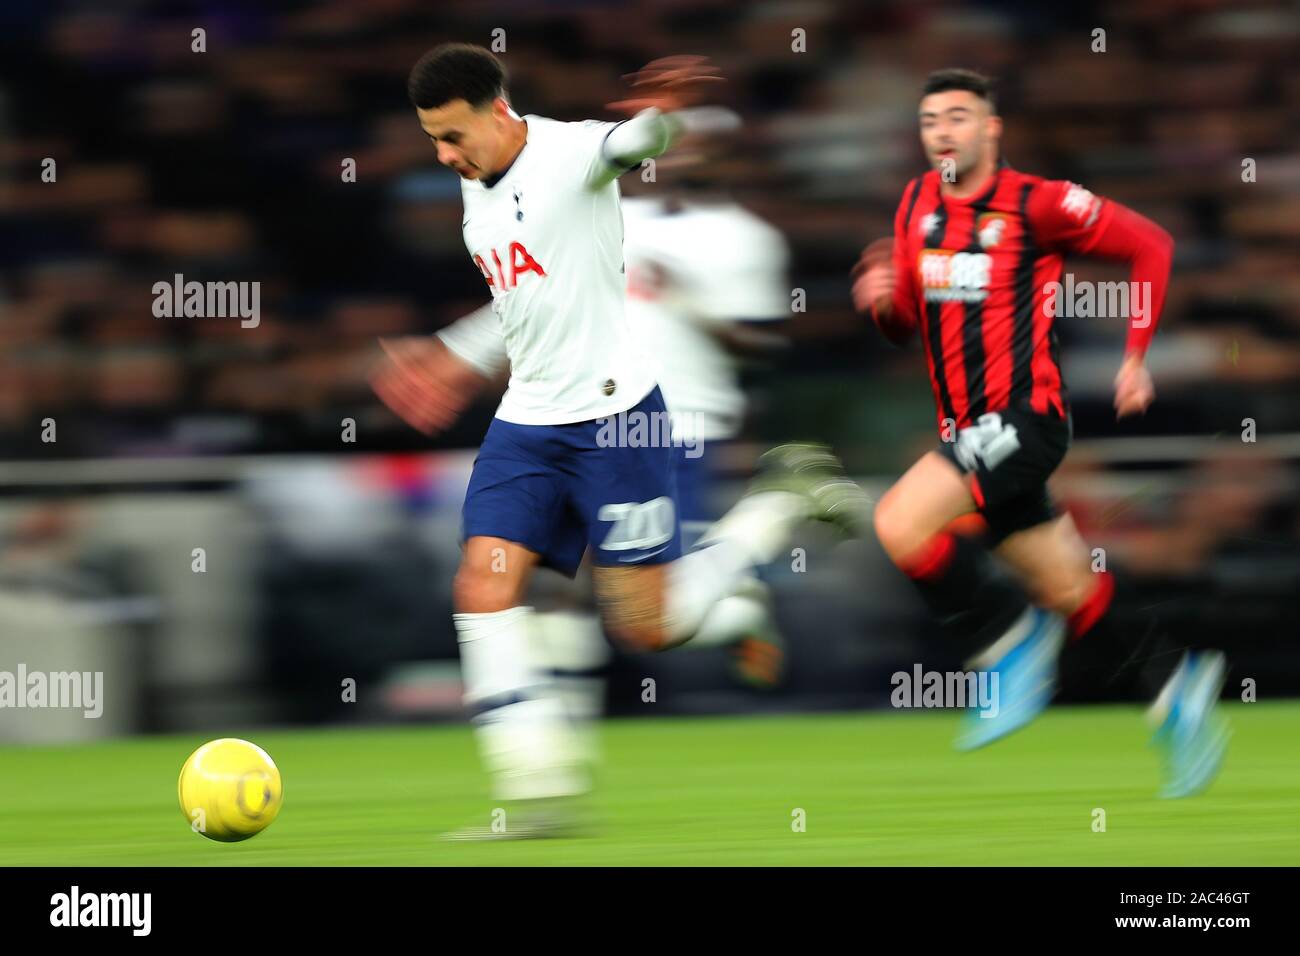 Tottenham's midfielder Dele Alli during the Barclays Premier League match between Tottenham Hotspur and Bournemouth at the Tottenham Hotspur Stadium, London, England. On the 30th November 2019. (Photo by AFS/Espa-Images) Stock Photo